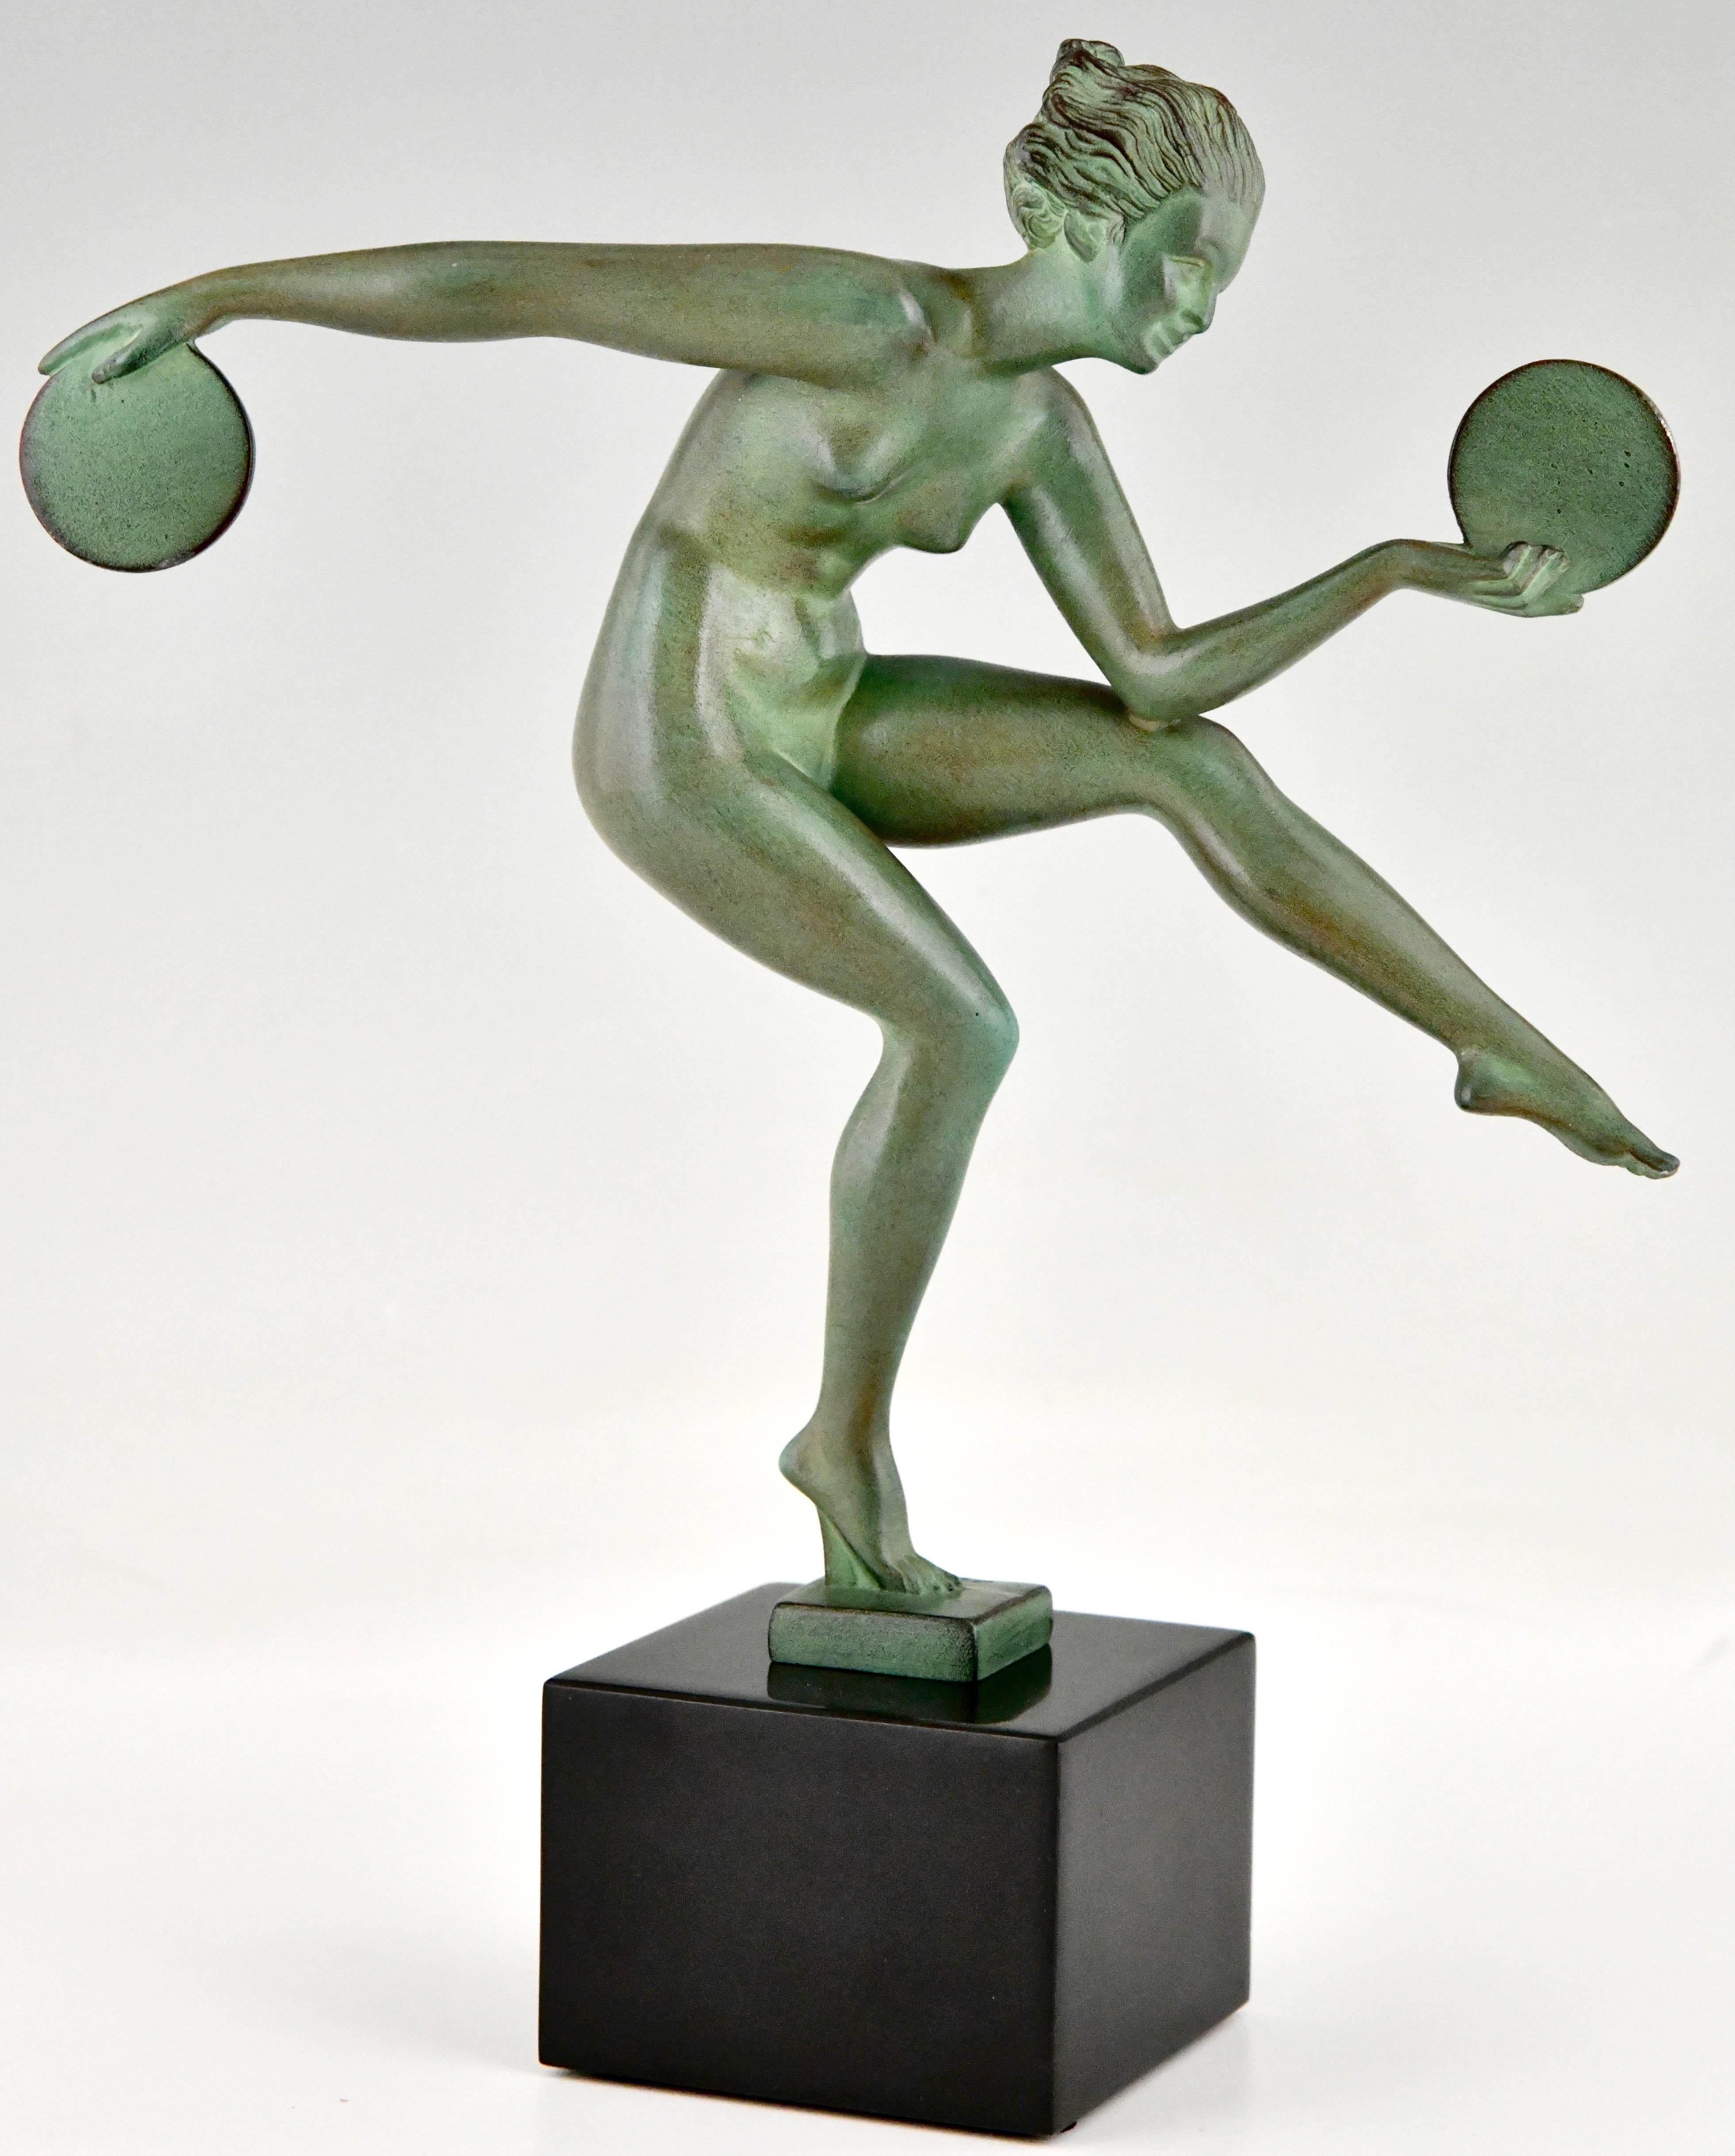 Art Deco sculpture nude disc dancer by Derenne.
Pseudonym used by Marcel Bouraine for his art metal sculptures cast by the Max Le Verrier foundry.
The sculpture is executed in Art metal with a green patina and is mounted on a Belgian Black marble